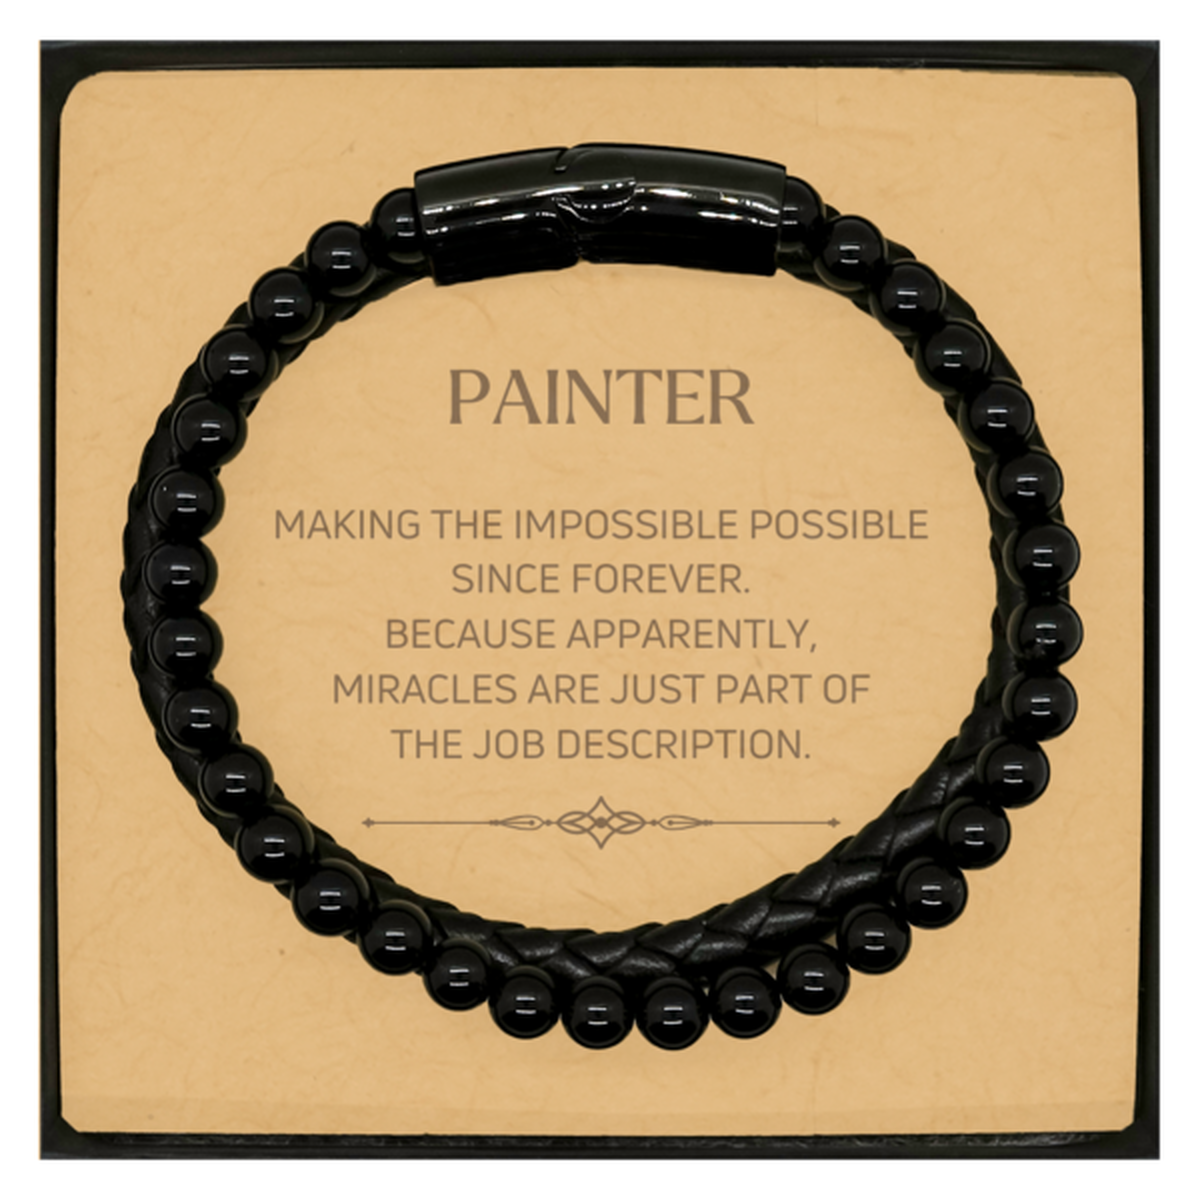 Funny Painter Gifts, Miracles are just part of the job description, Inspirational Birthday Christmas Stone Leather Bracelets For Painter, Men, Women, Coworkers, Friends, Boss